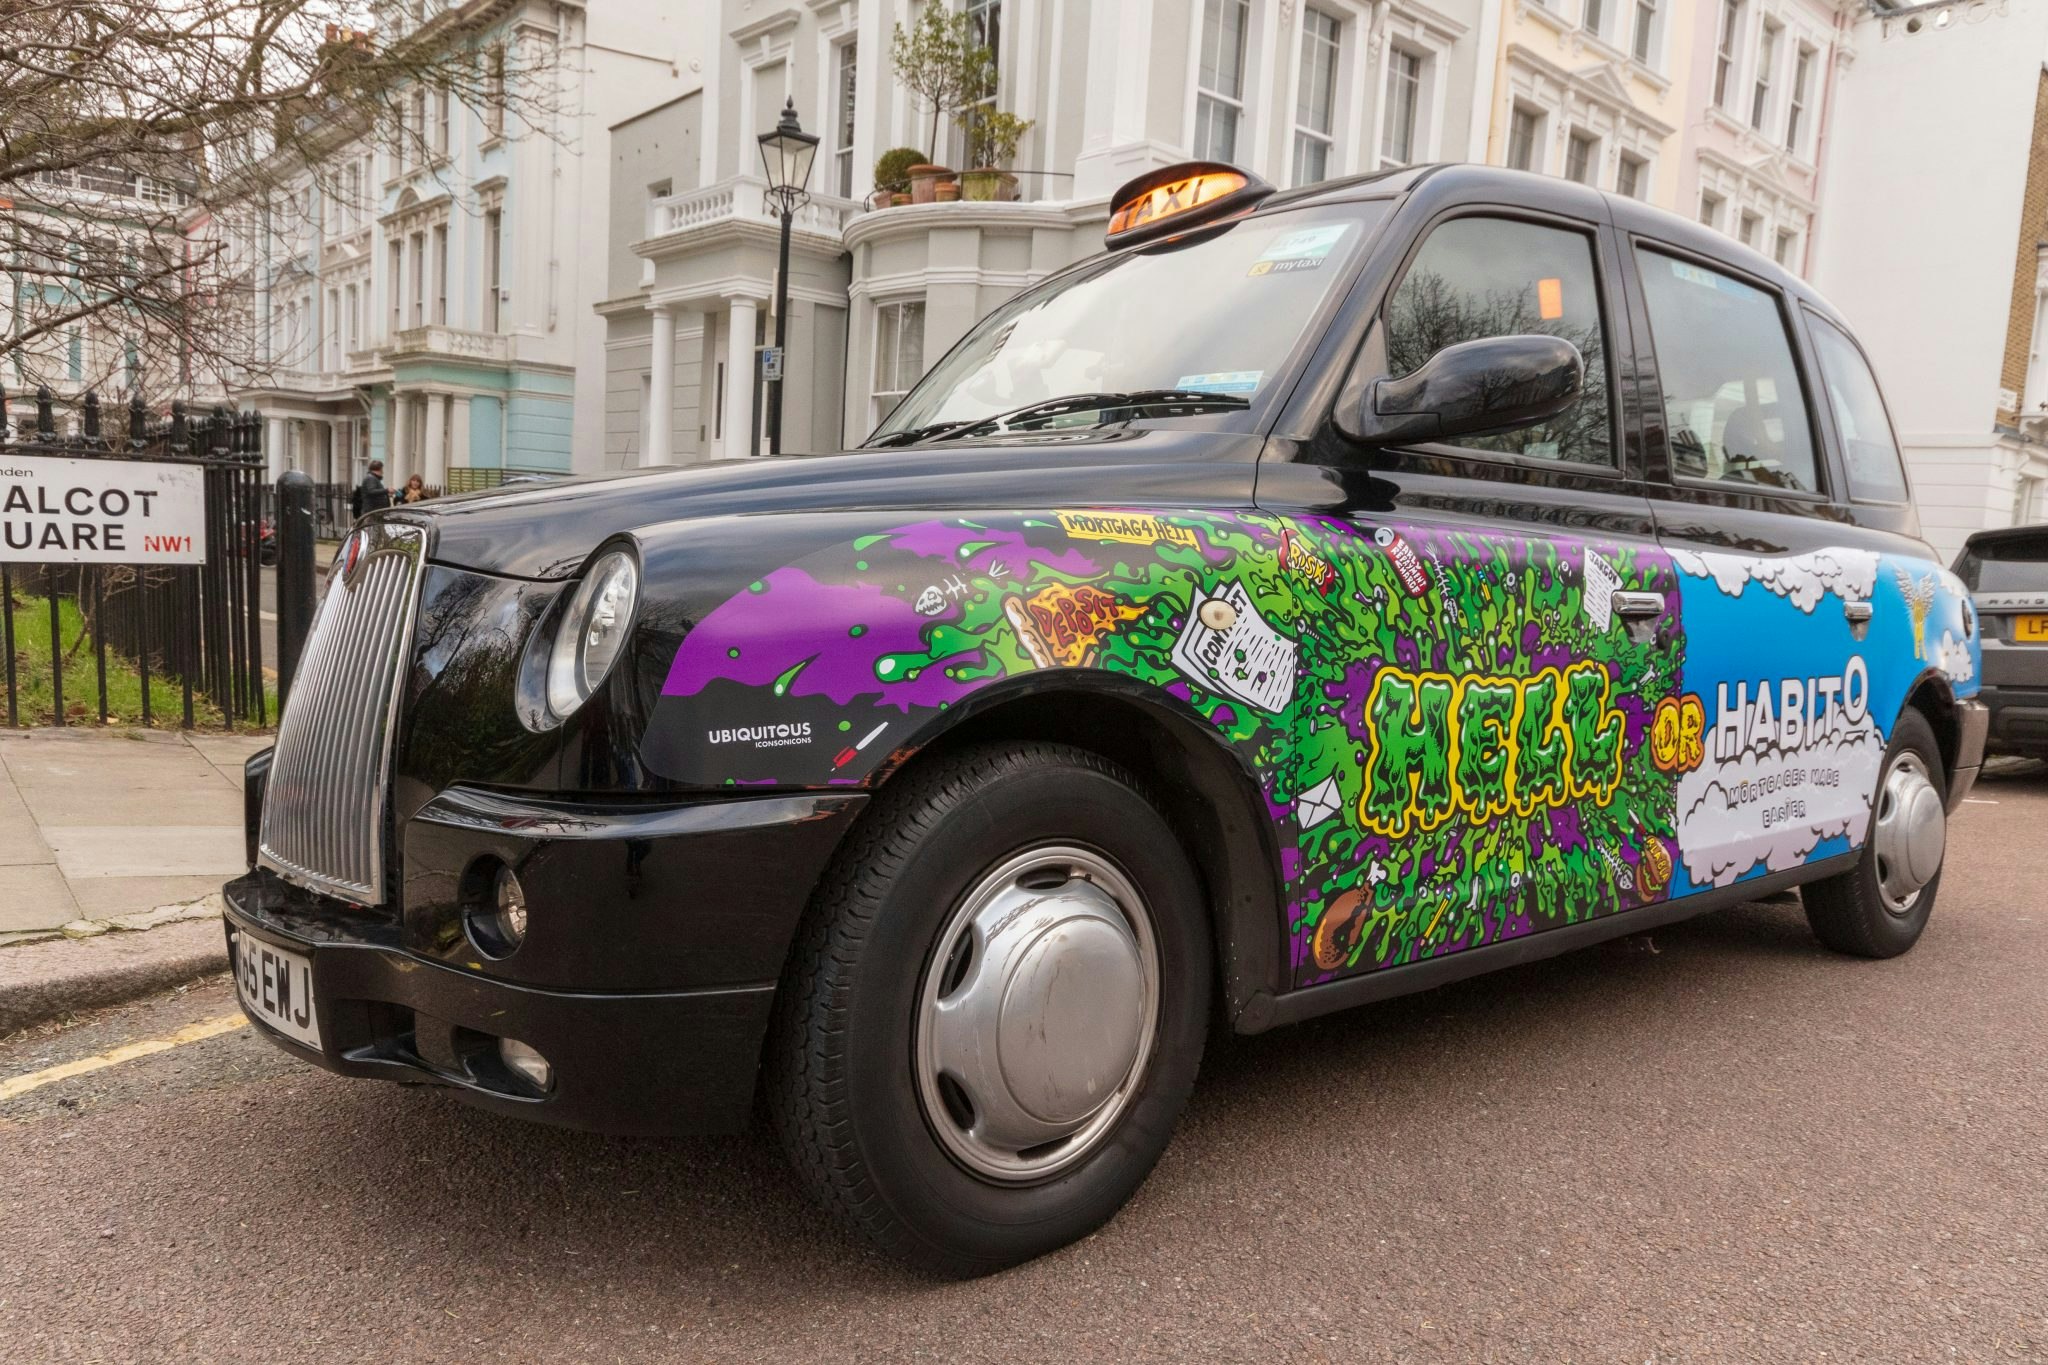 A Habito advert on a black cab in London.